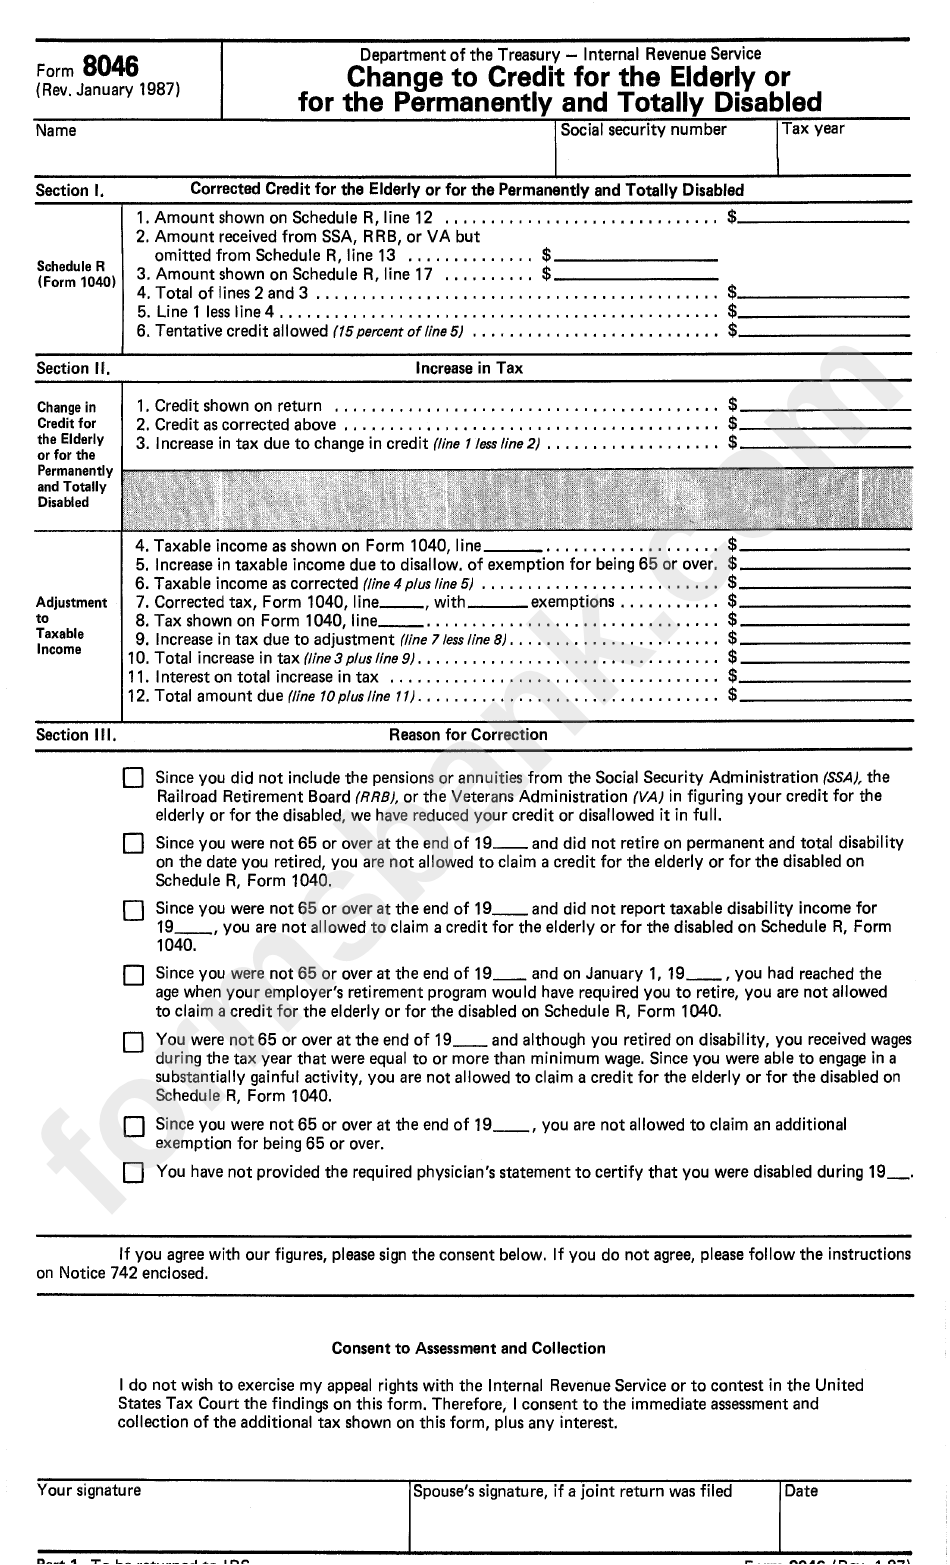 Form 8046 - Change To Credit For The Elderly Or For The Permanently And Totally Disabled Form